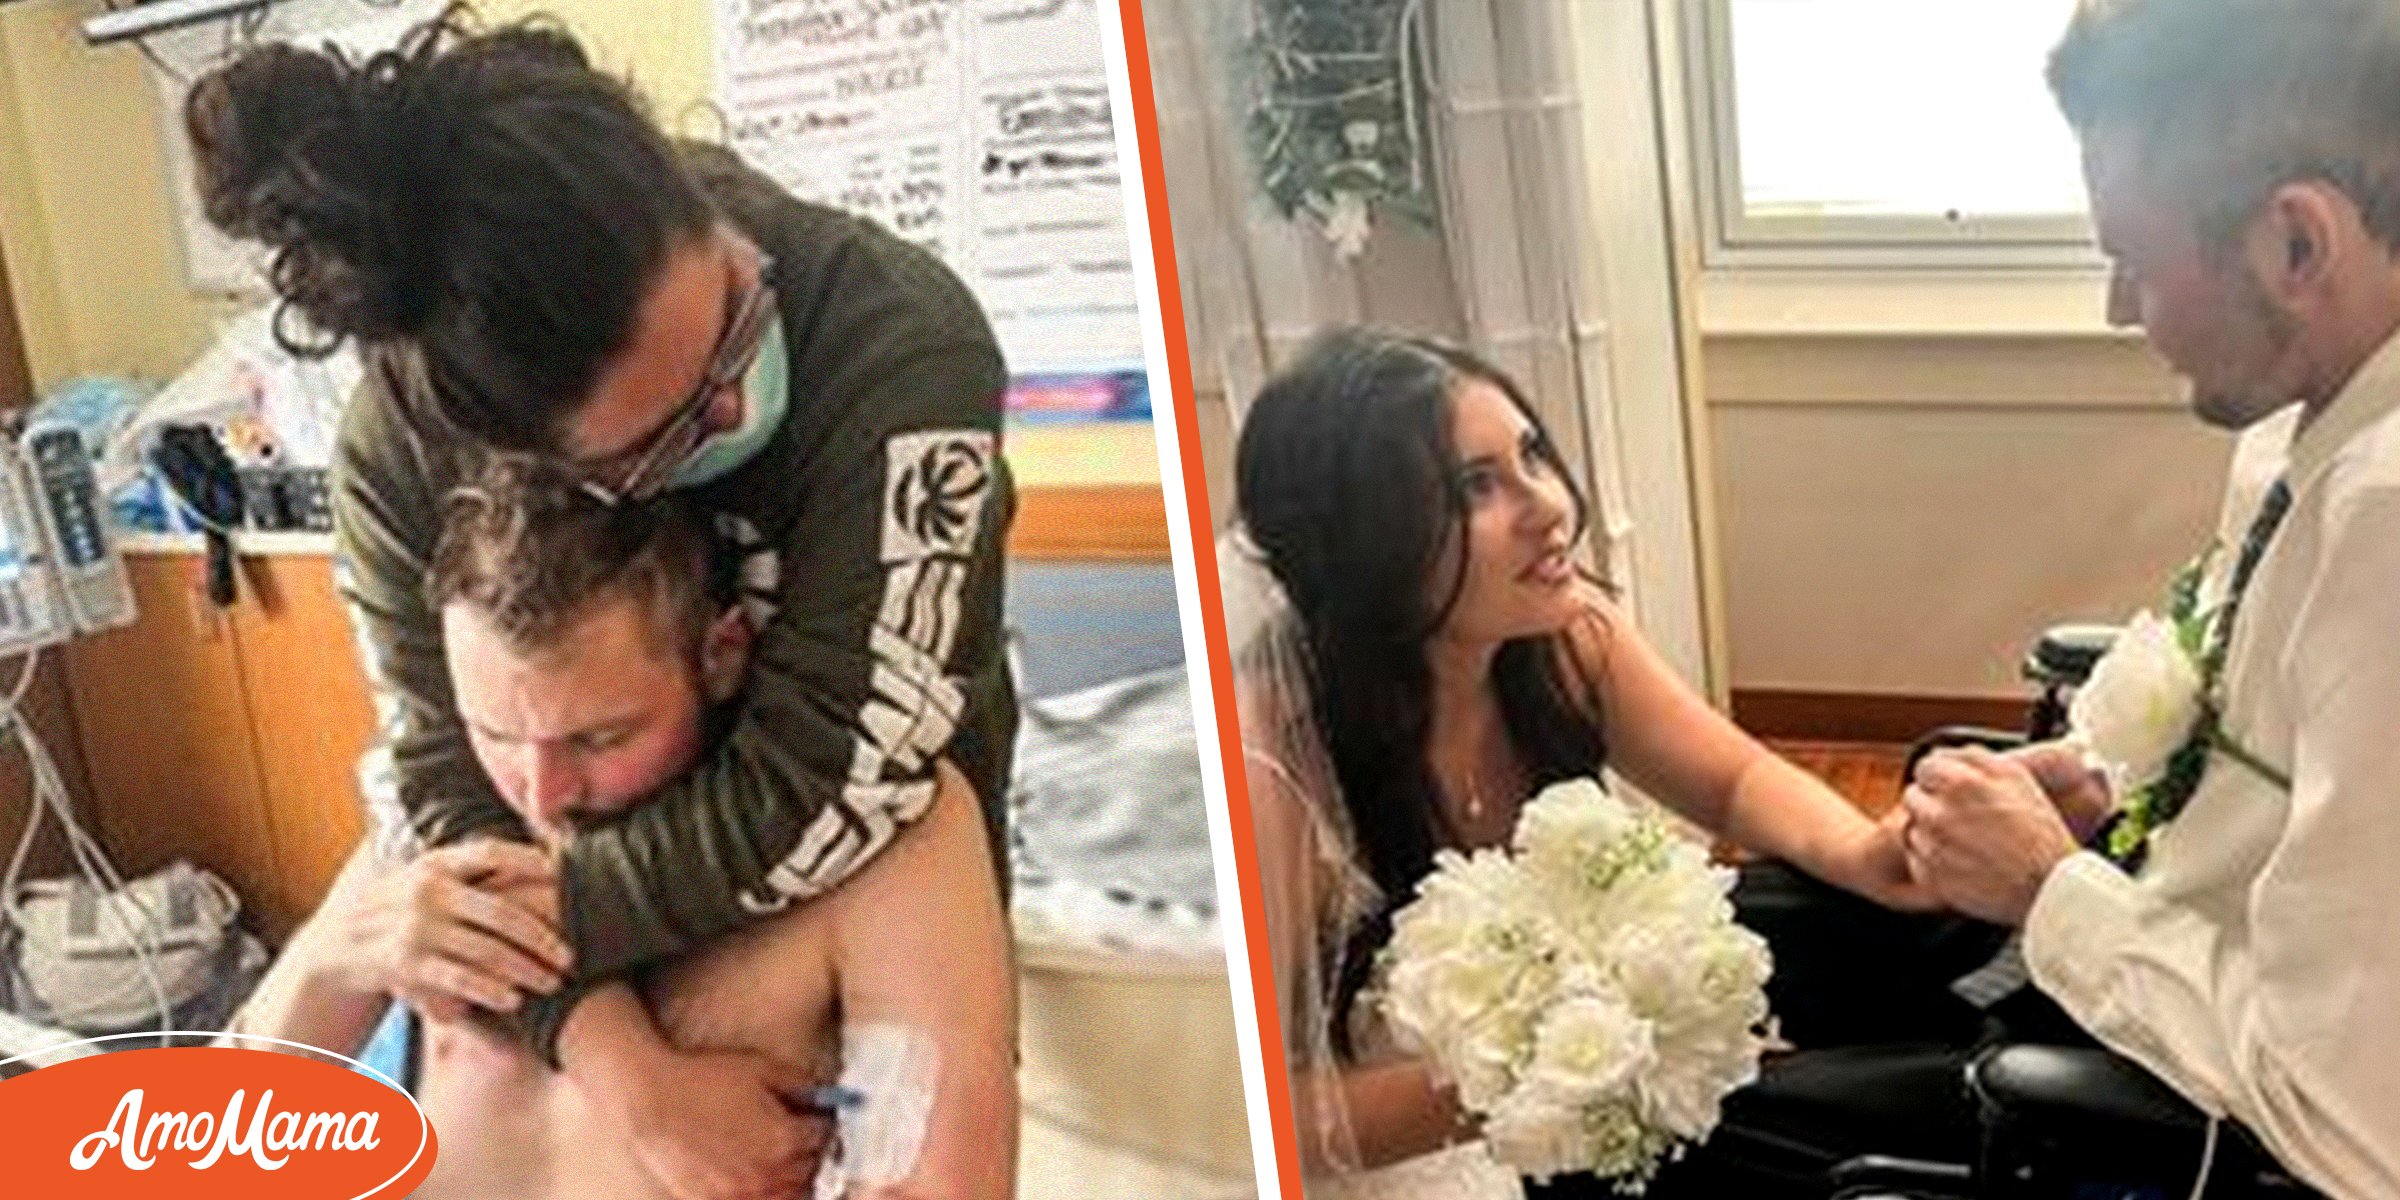  'Depleted' Man Learns He Is Cured of Stage 4 Cancer after Marrying His Love in the Hospital Room 